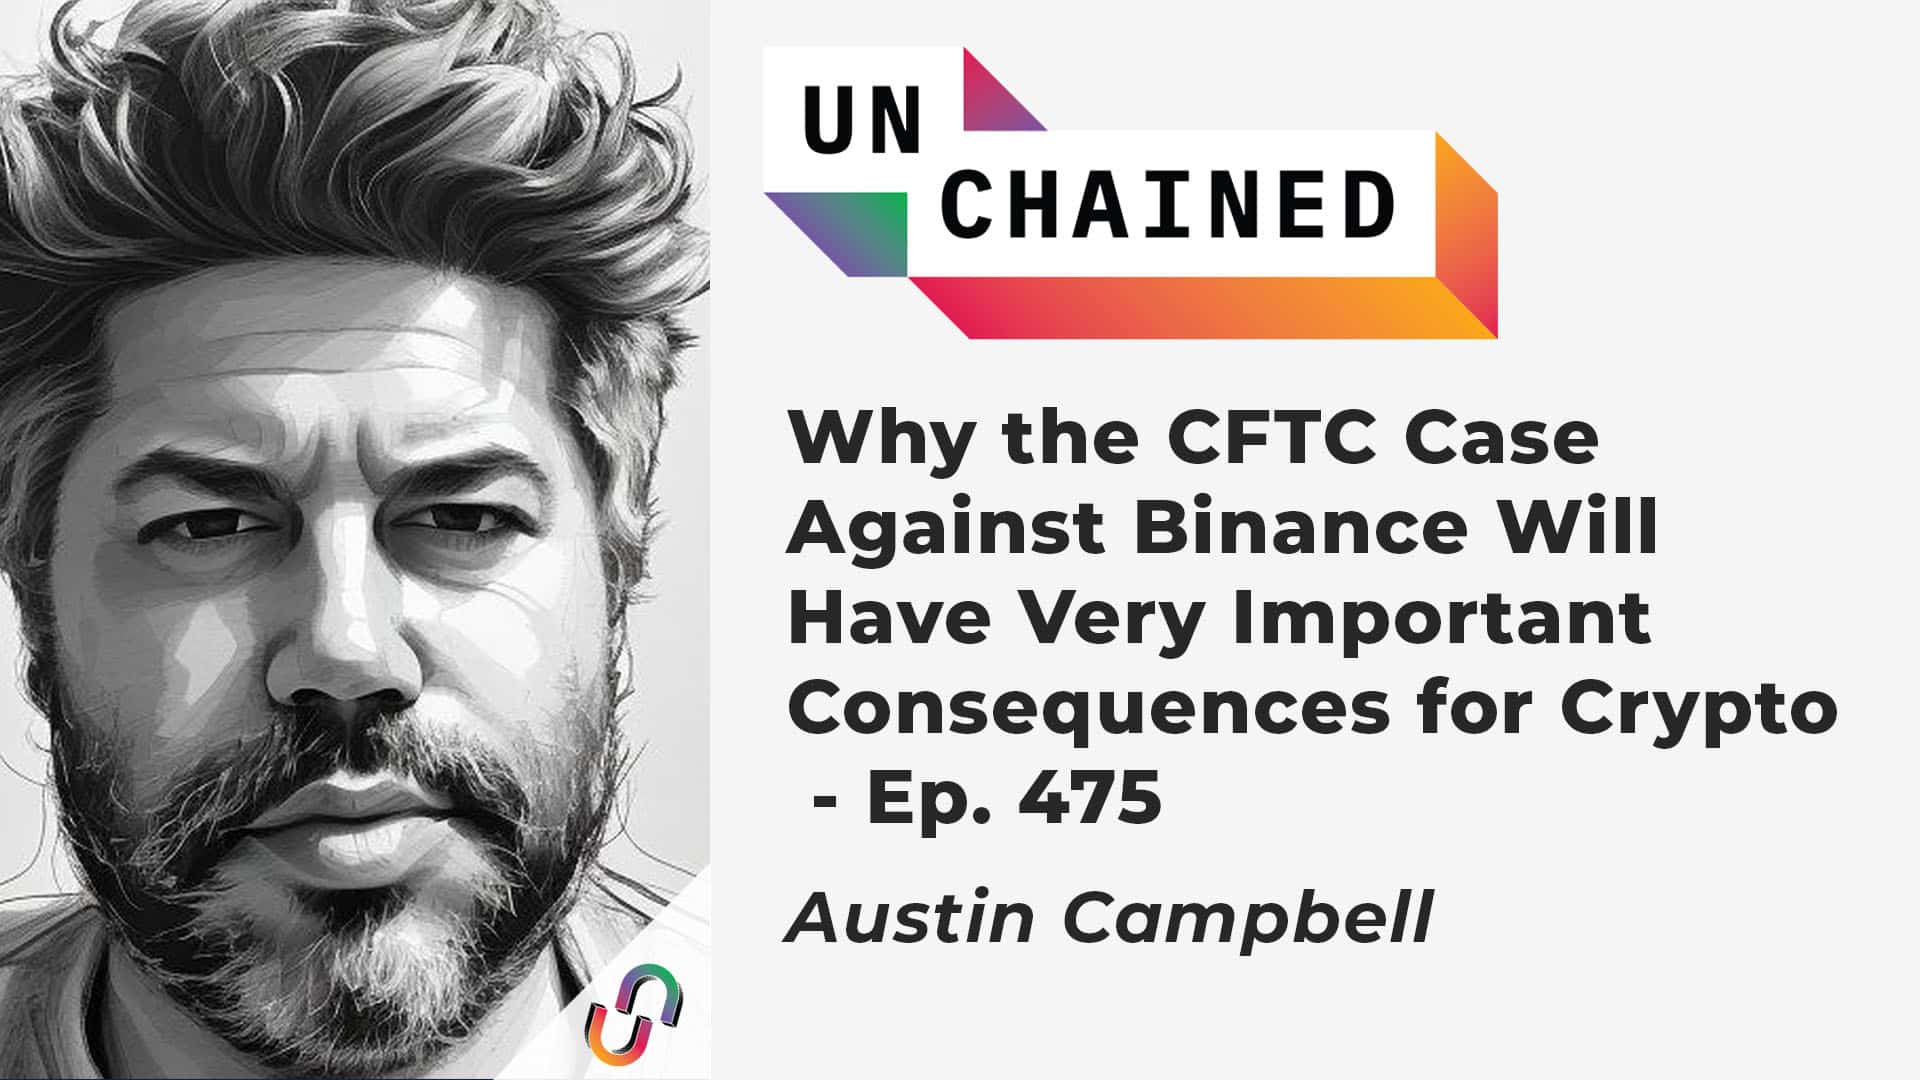 Why the CFTC Case Against Binance Will Have Very Important Consequences for Crypto - Ep. 475